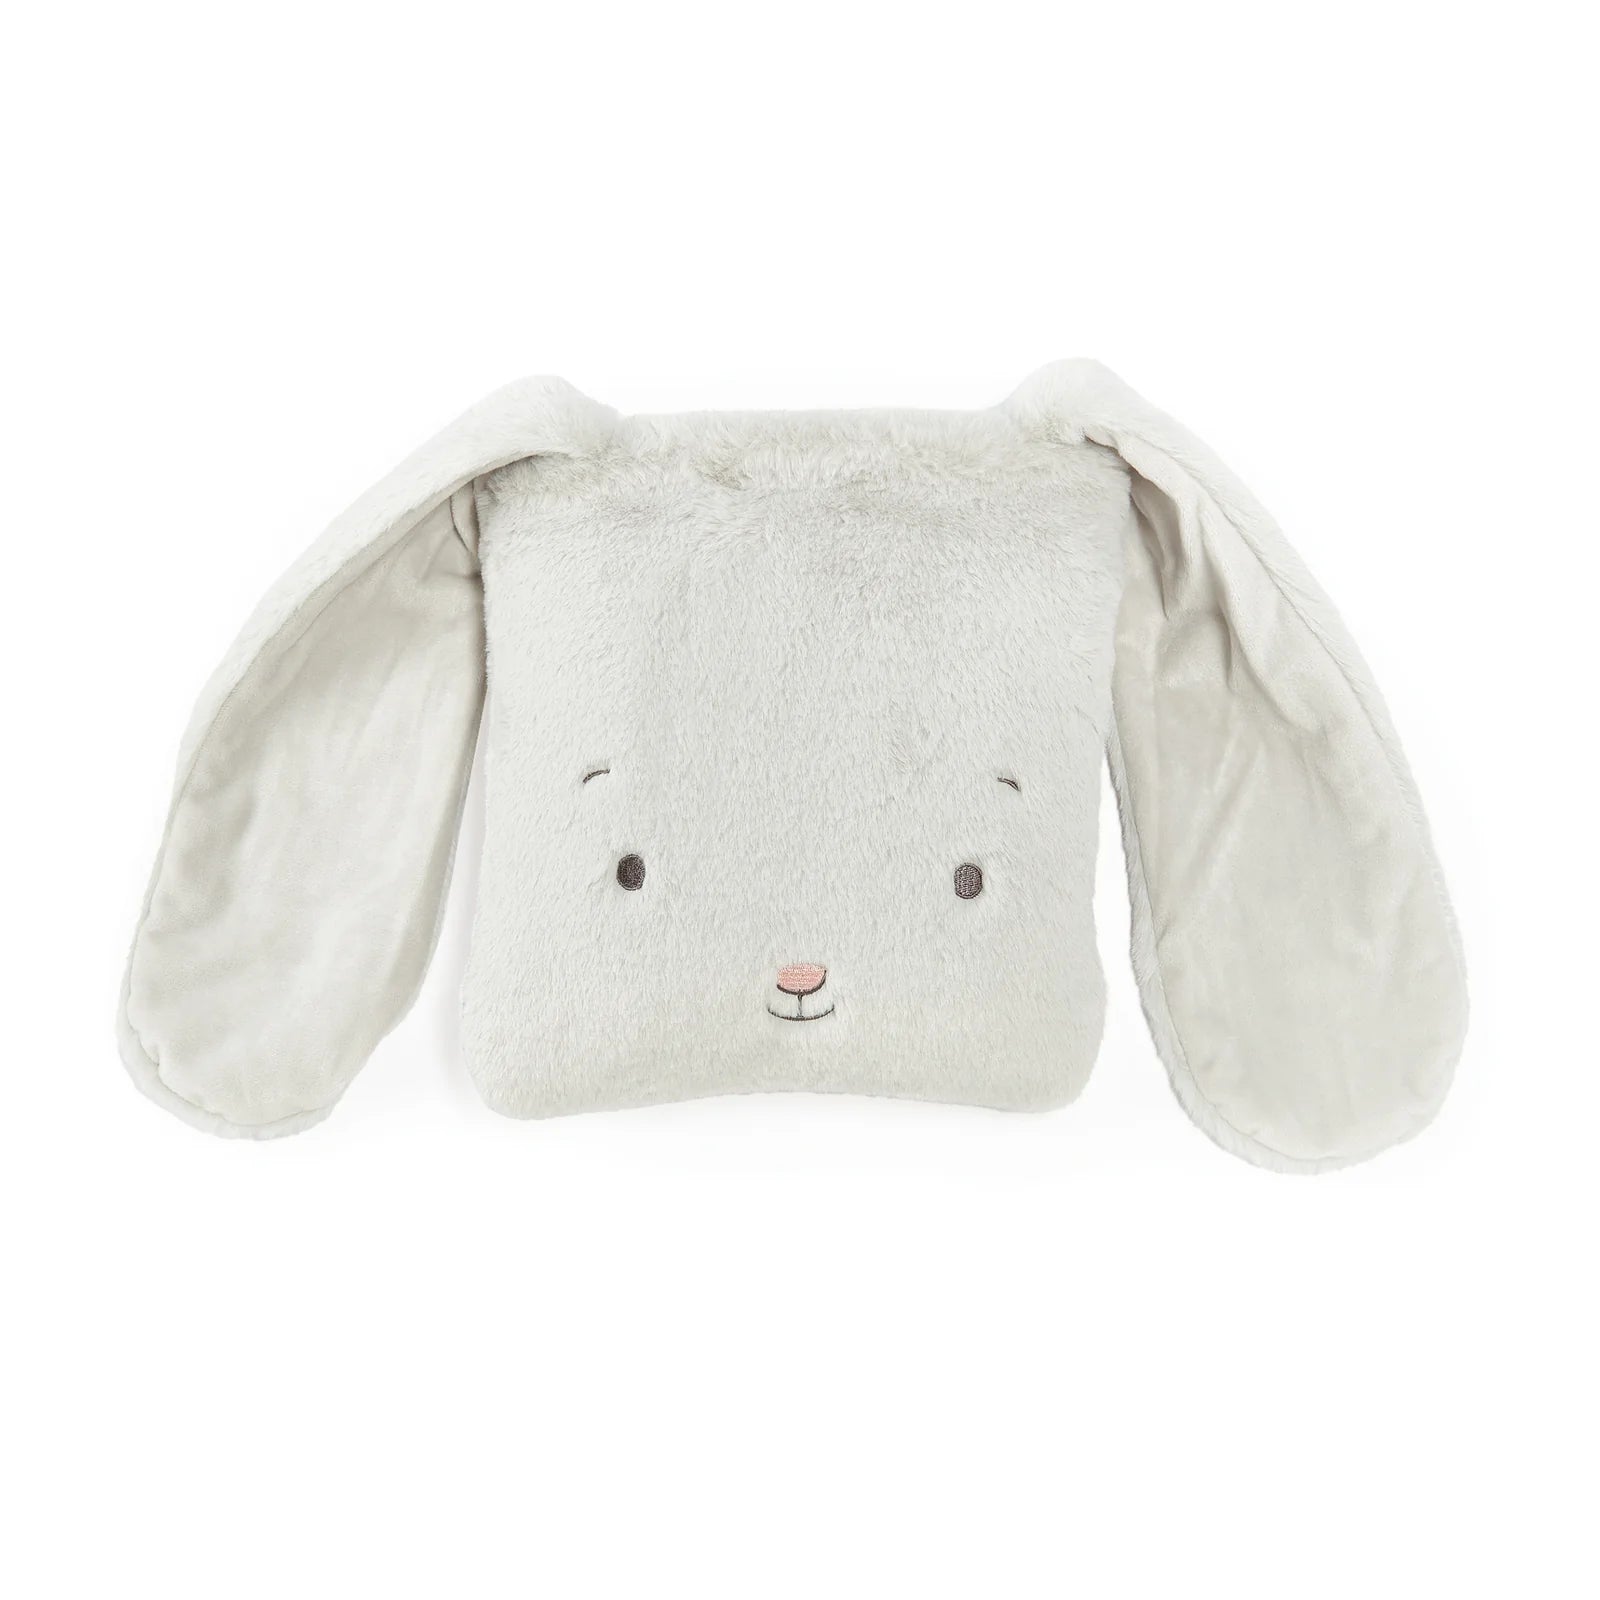 PERSONALIZED BLANKET - Grey Bunny tuck me in